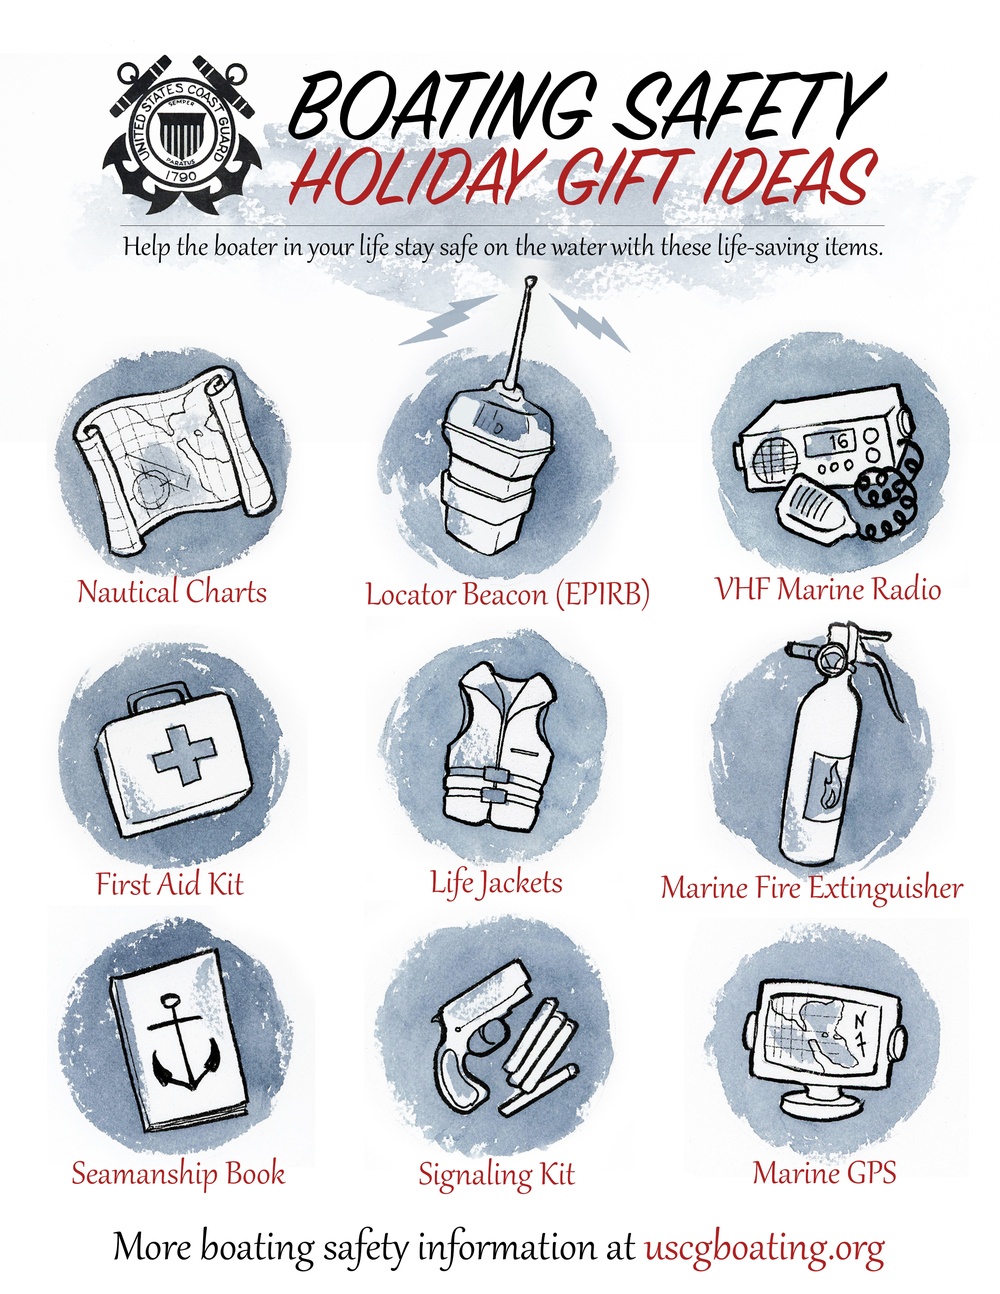 Coast Guard suggests life-saving gift ideas for boaters